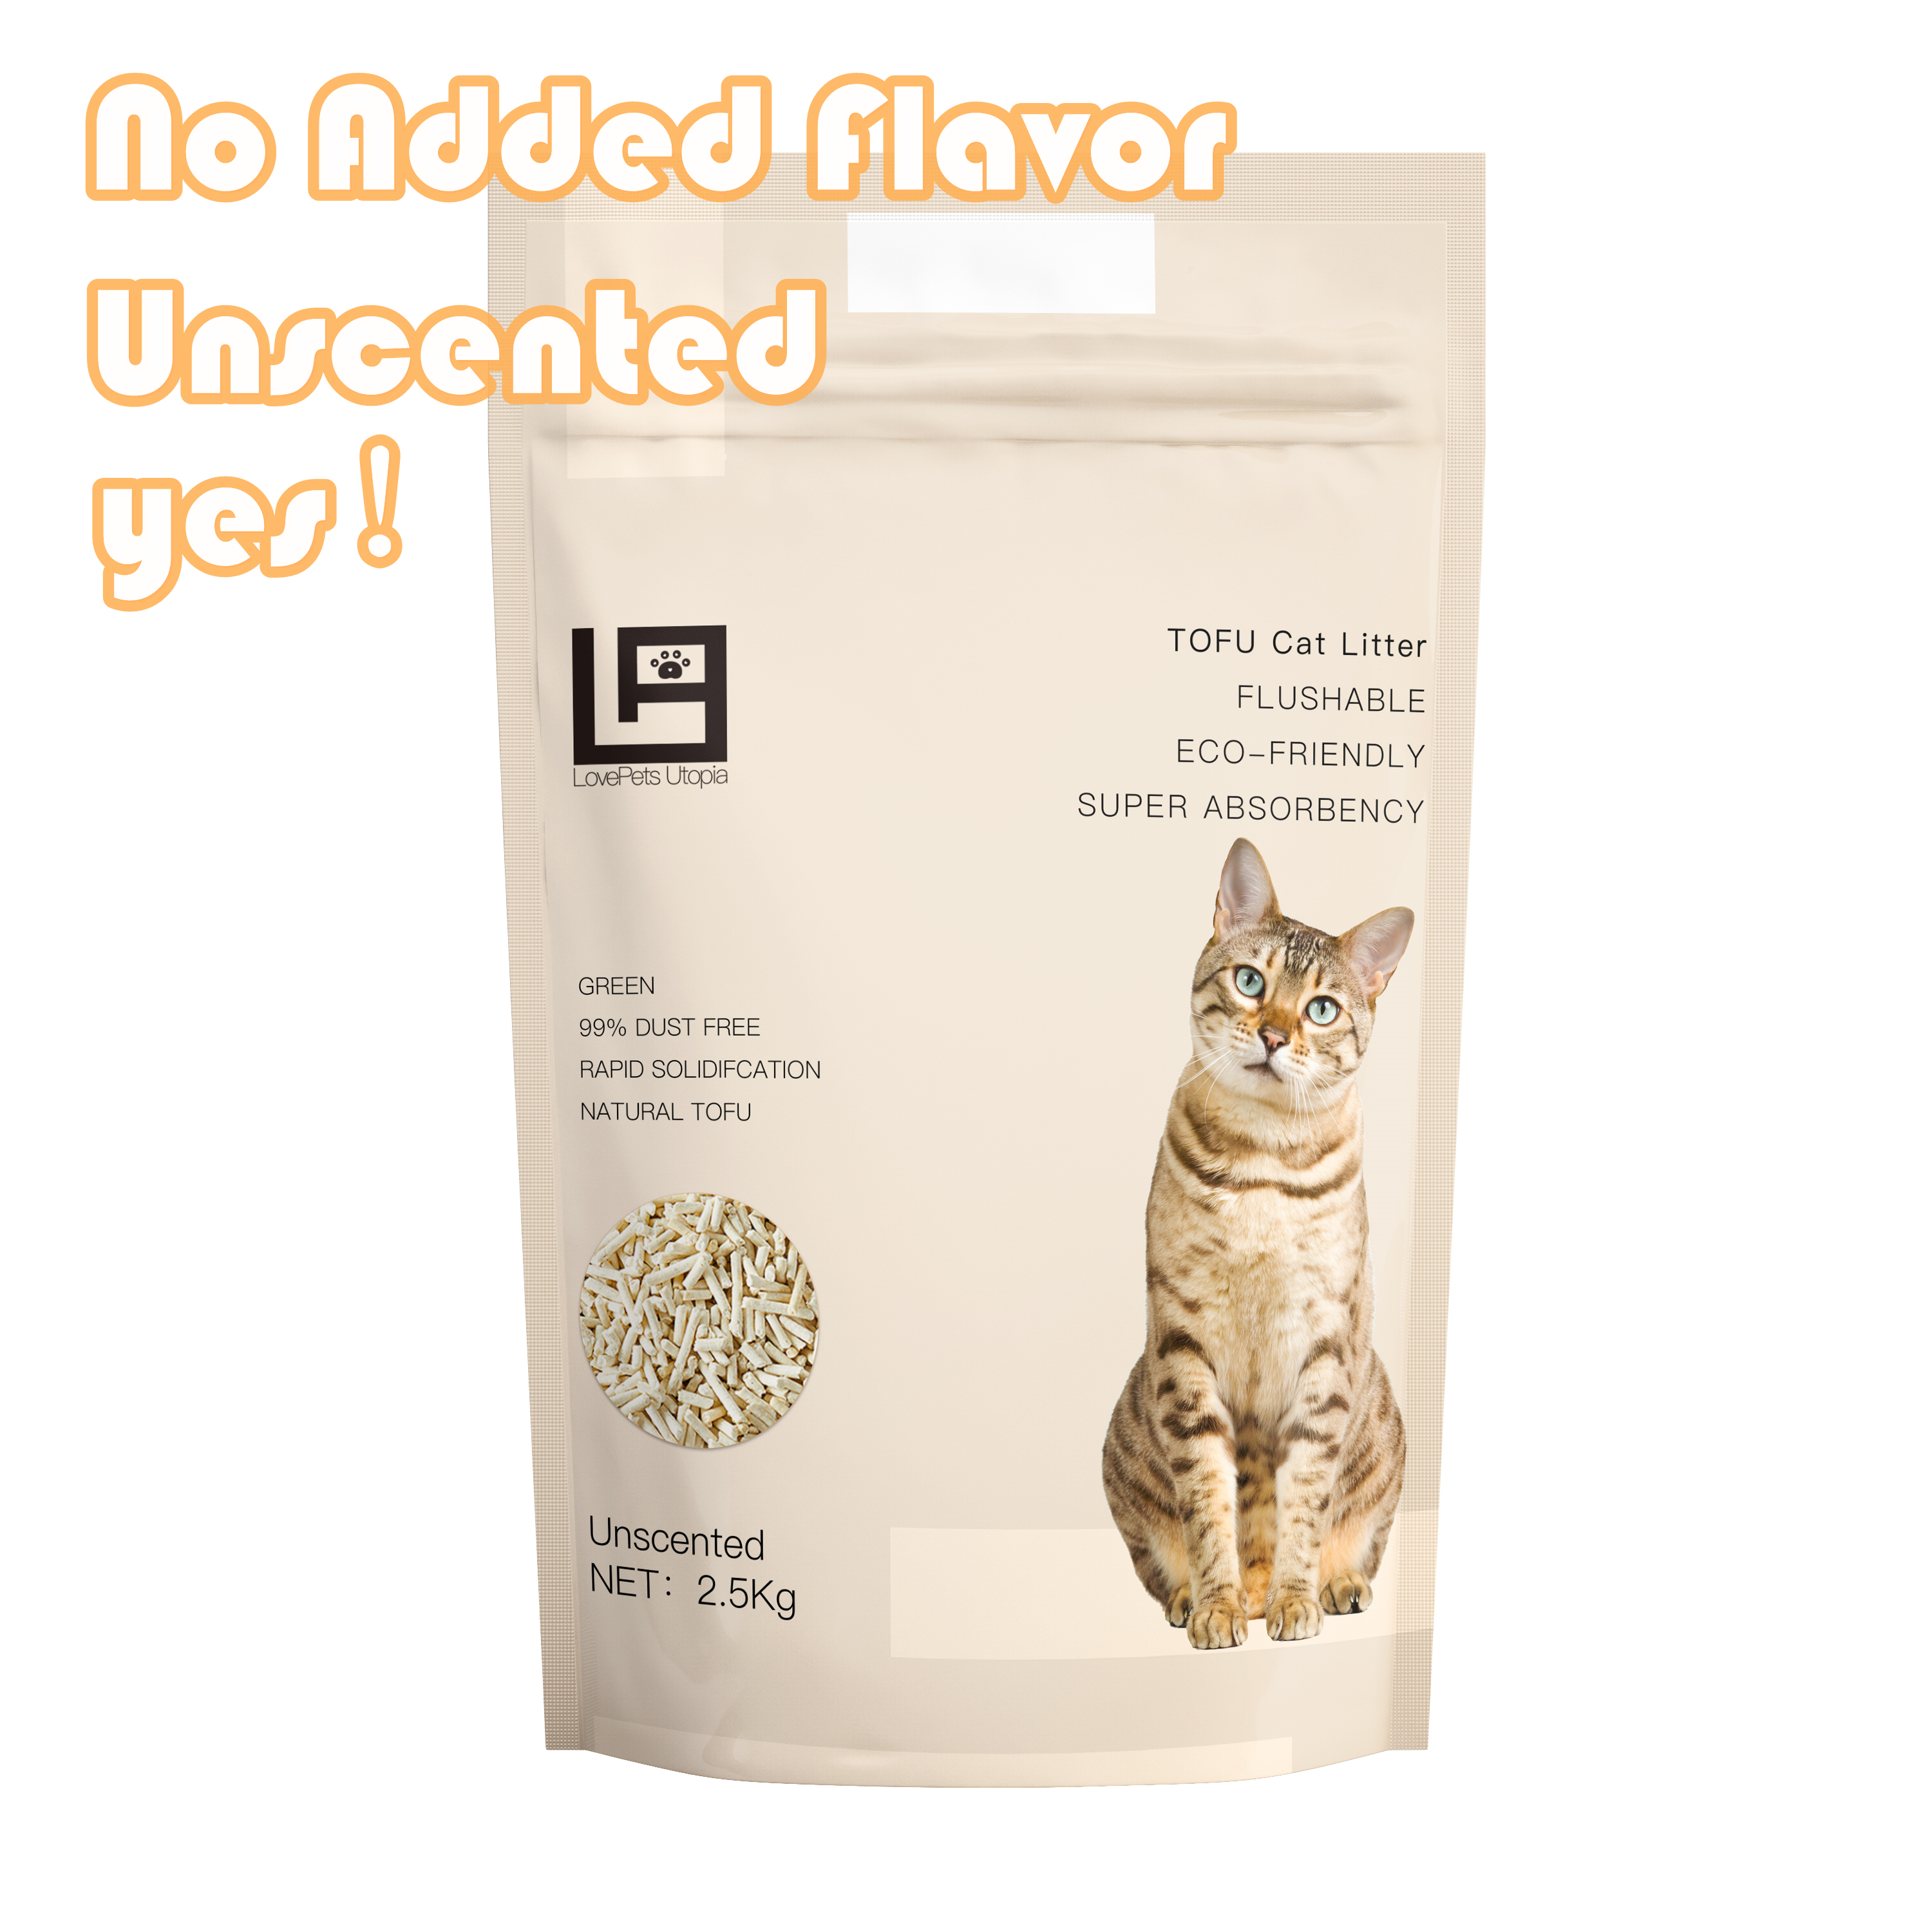 Love Pets Utopia Cat Uscented Flavor Dust Free Tofu Cat Litter Featured Image